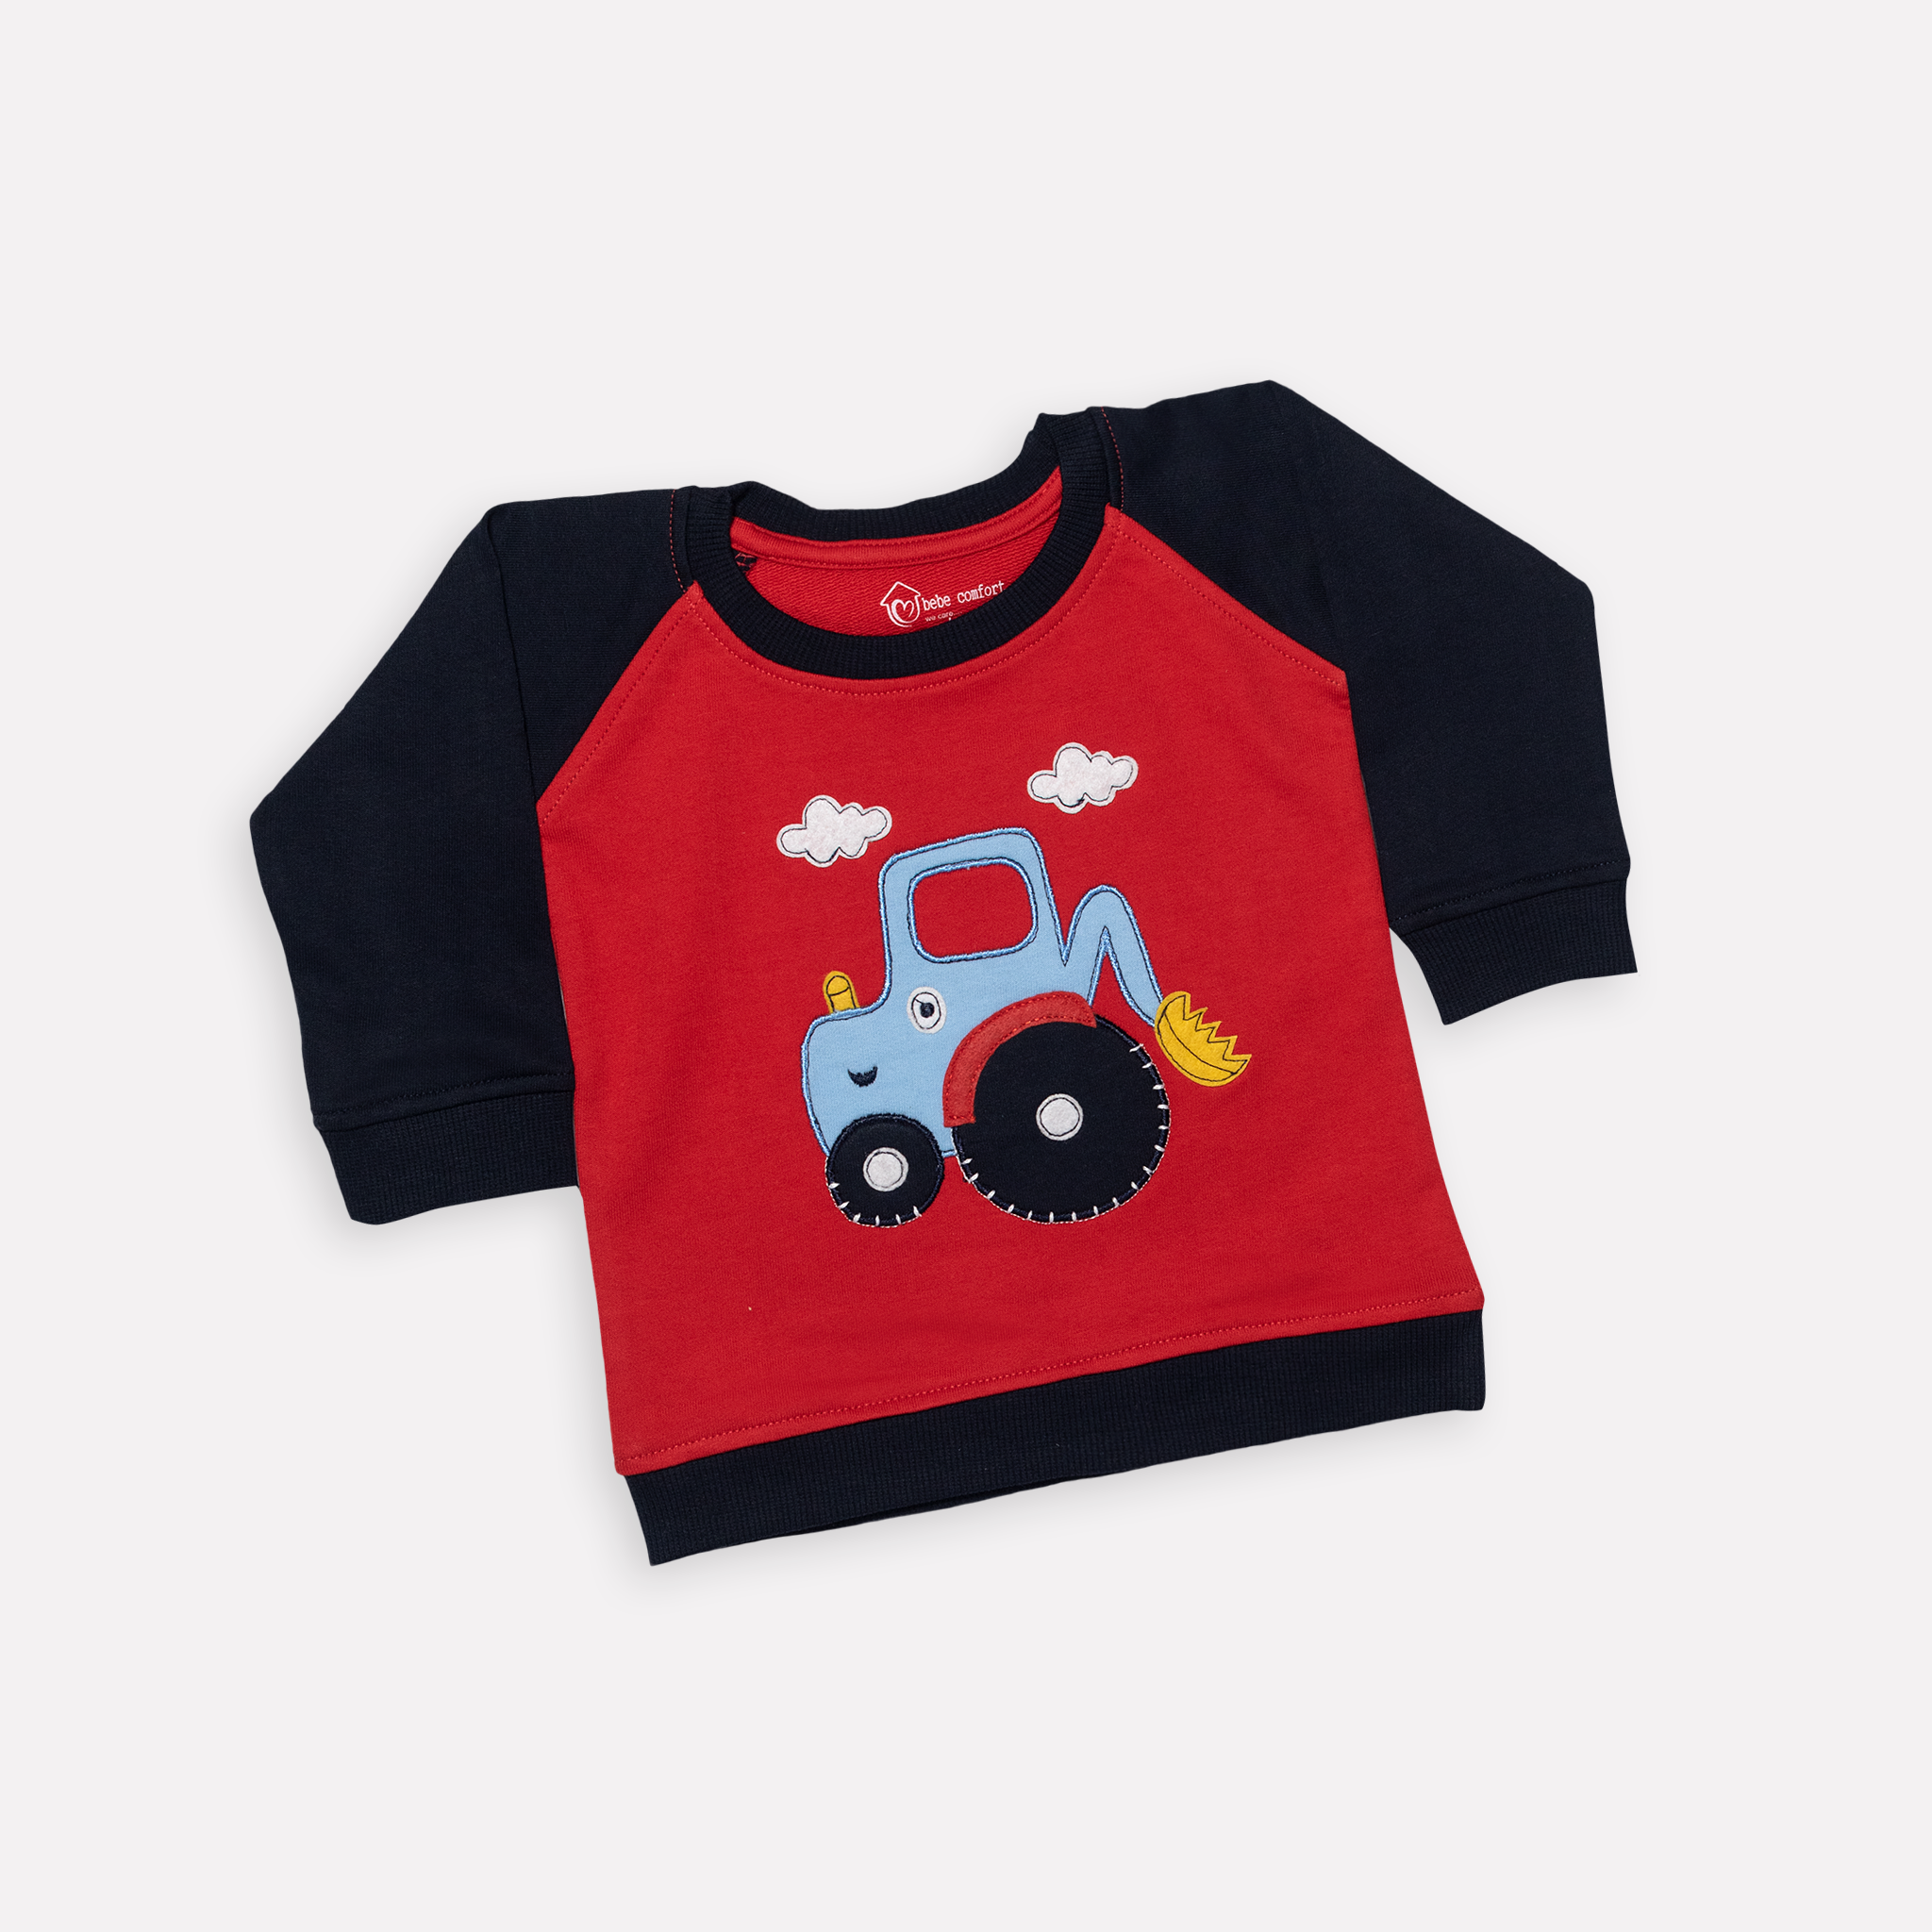 Winter-wear with Tractor Design